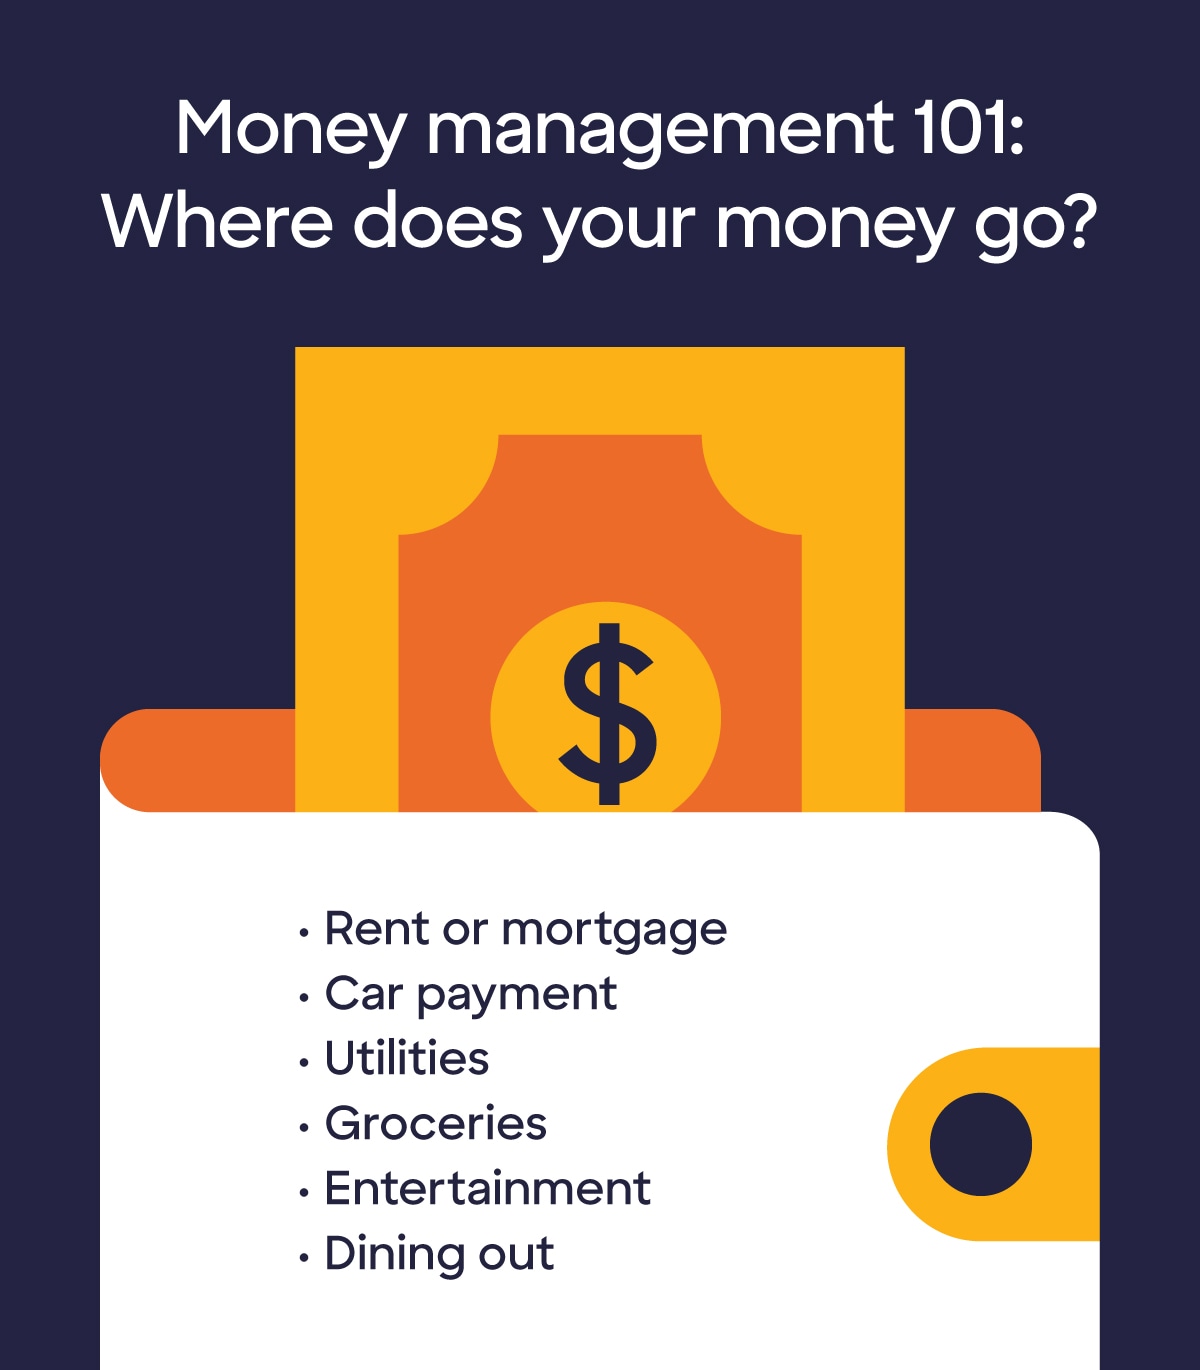 Graphic listing ways you might spend your money such as rent or mortgage, car payment, utilities, groceries, entertainment, and dining out. 